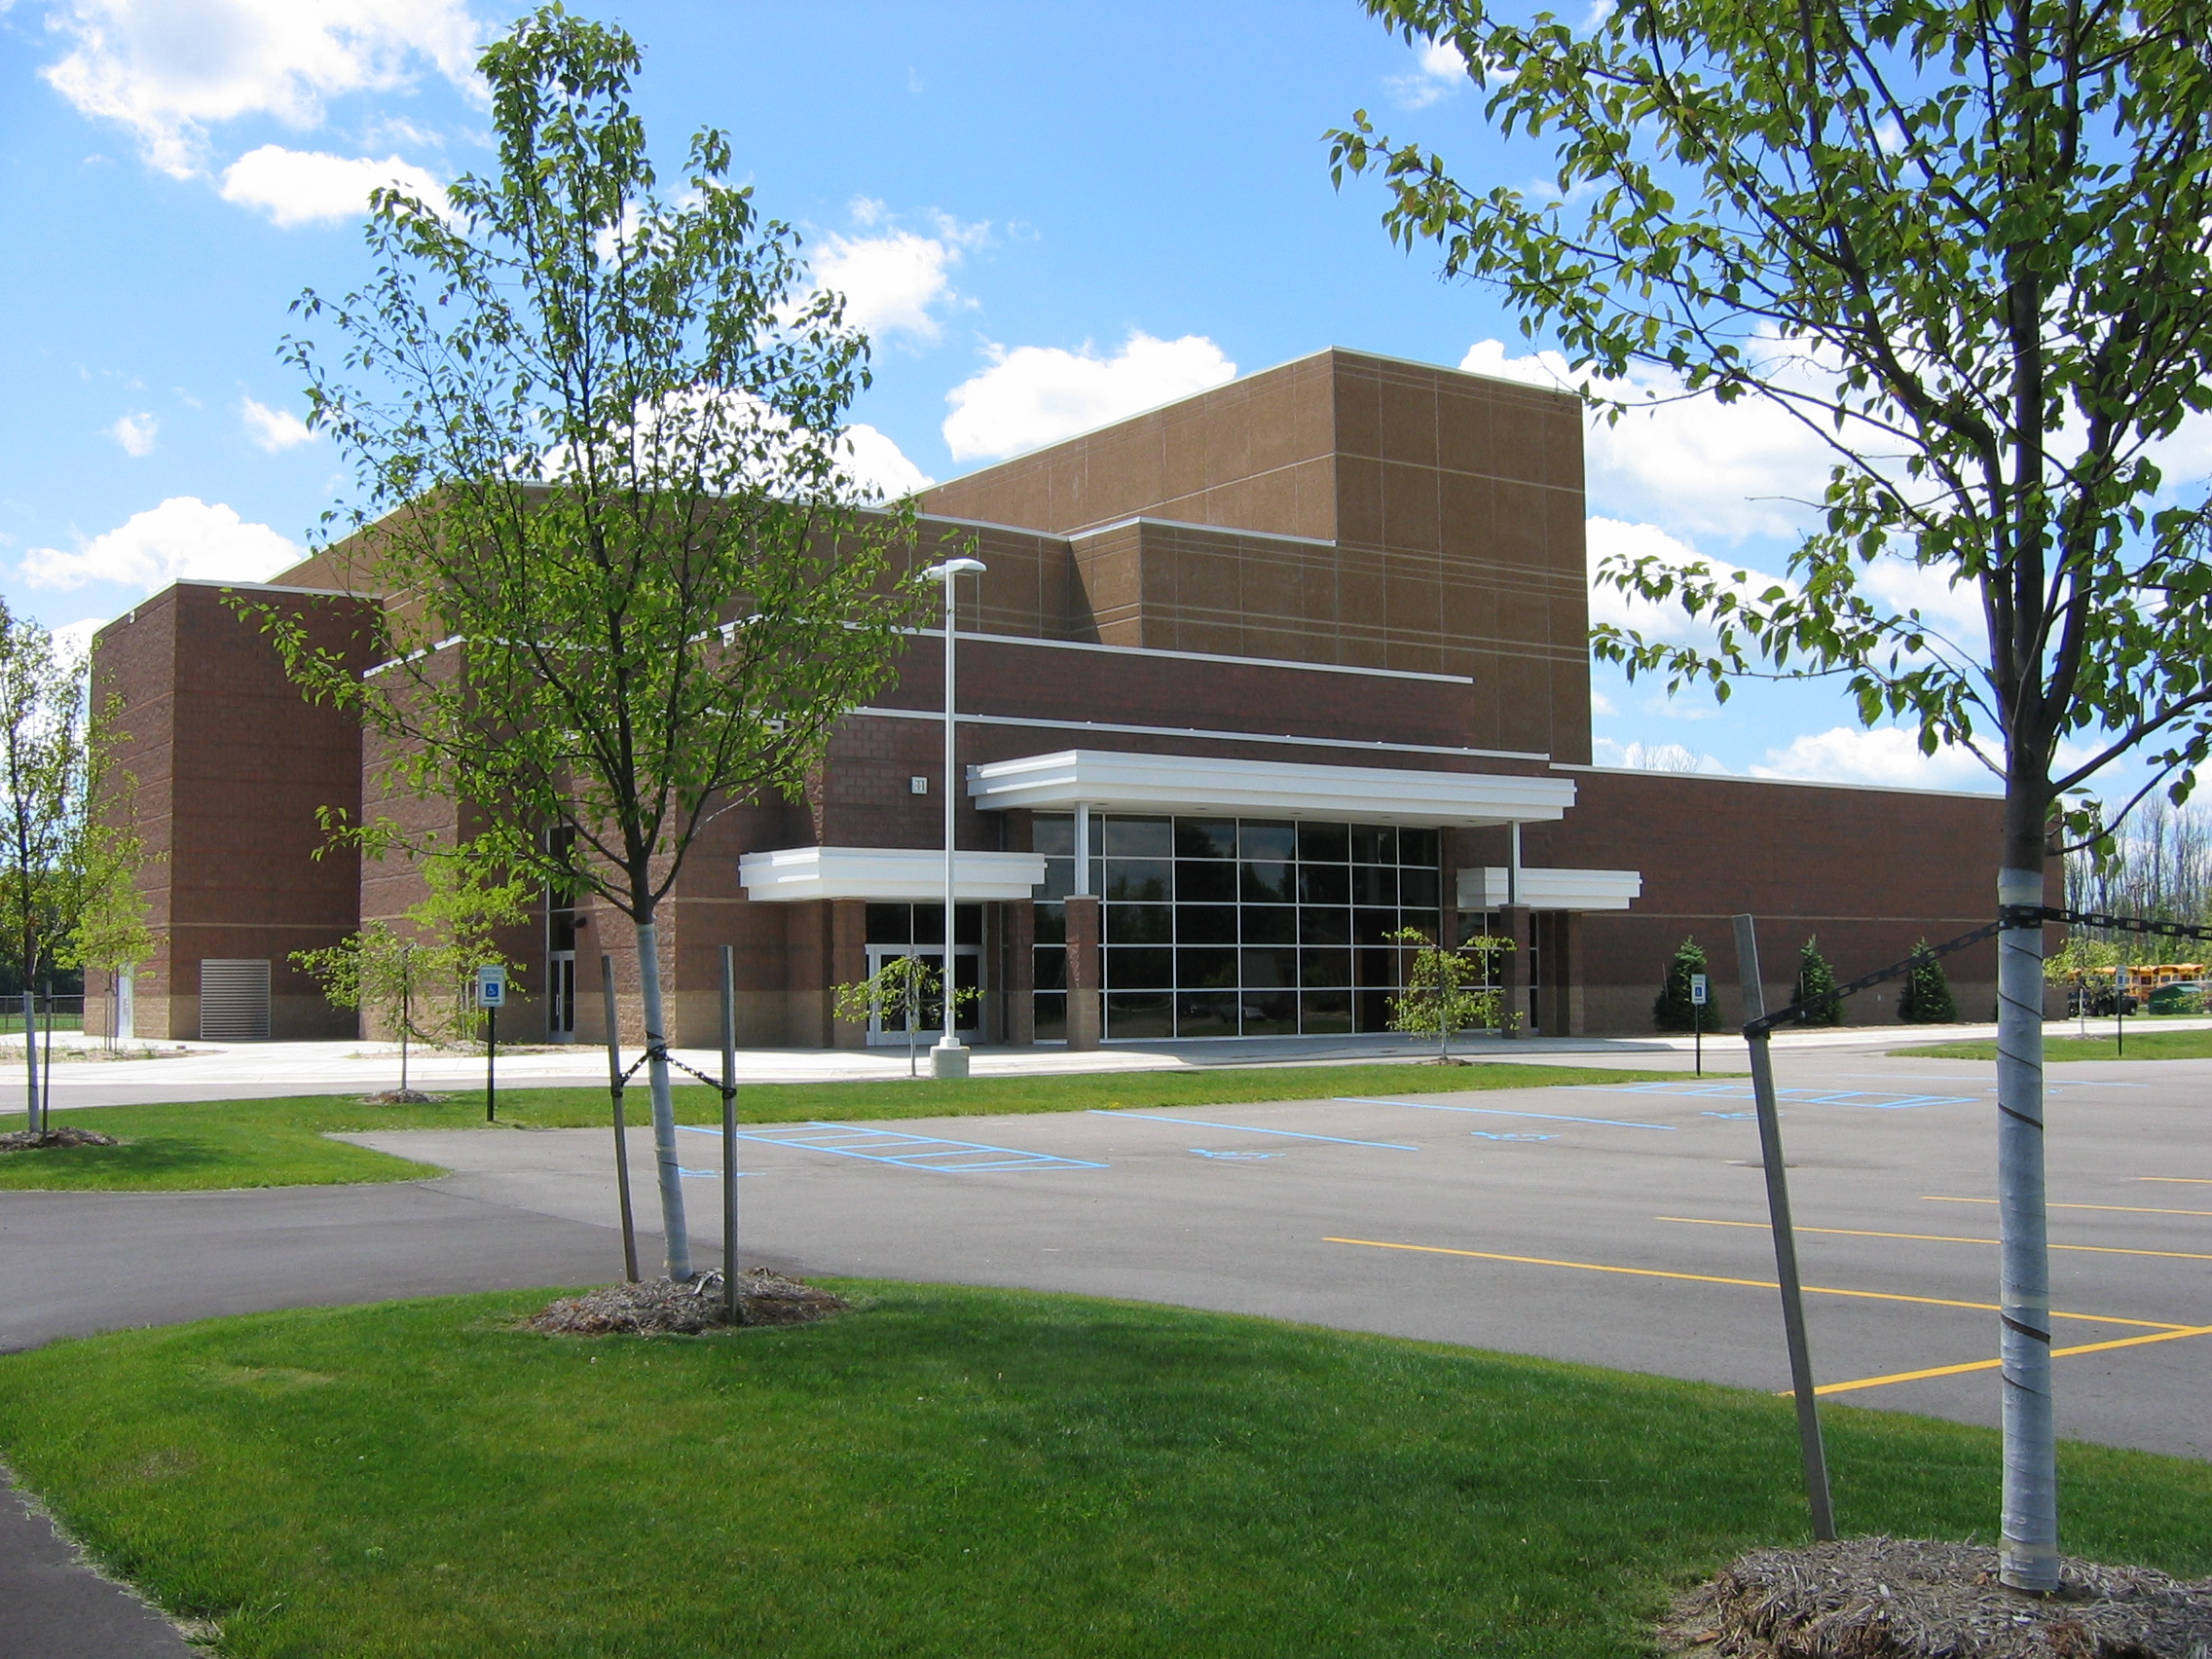 Picture of the Performing Arts Center